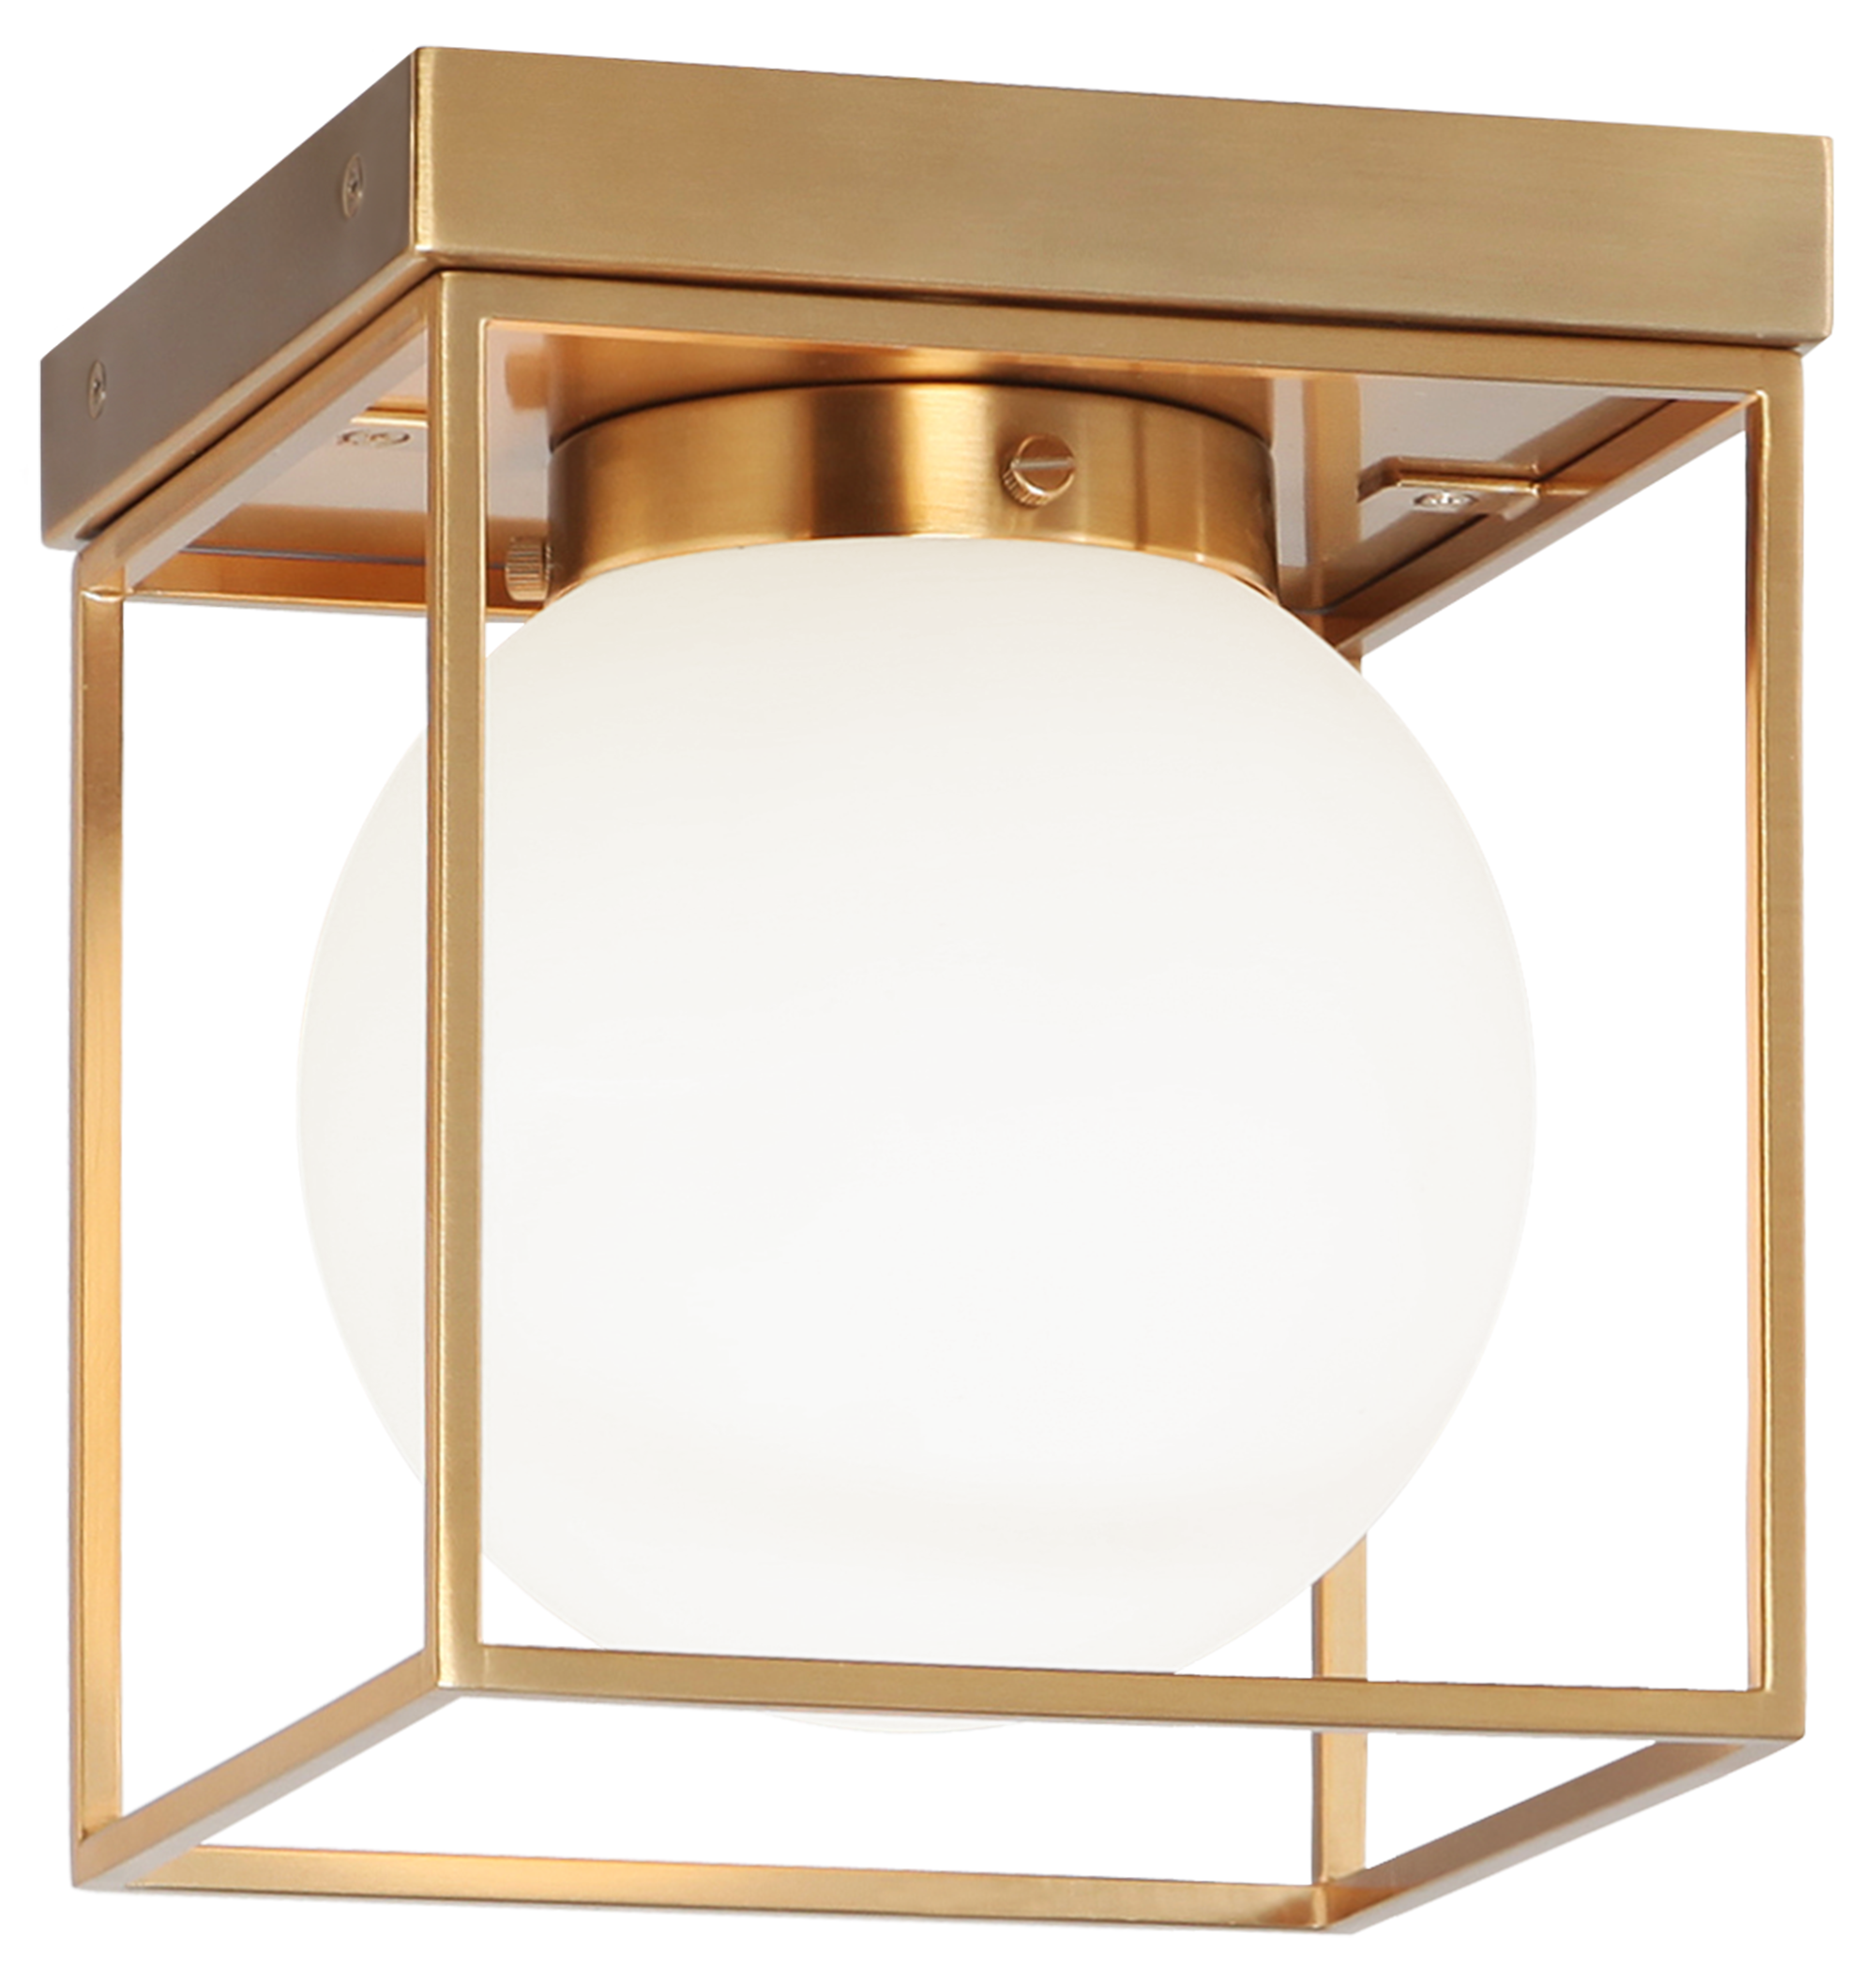 Matteo Squircle X03801AG Square Flush Mount Ceiling Light Fixture - Aged Gold Brass